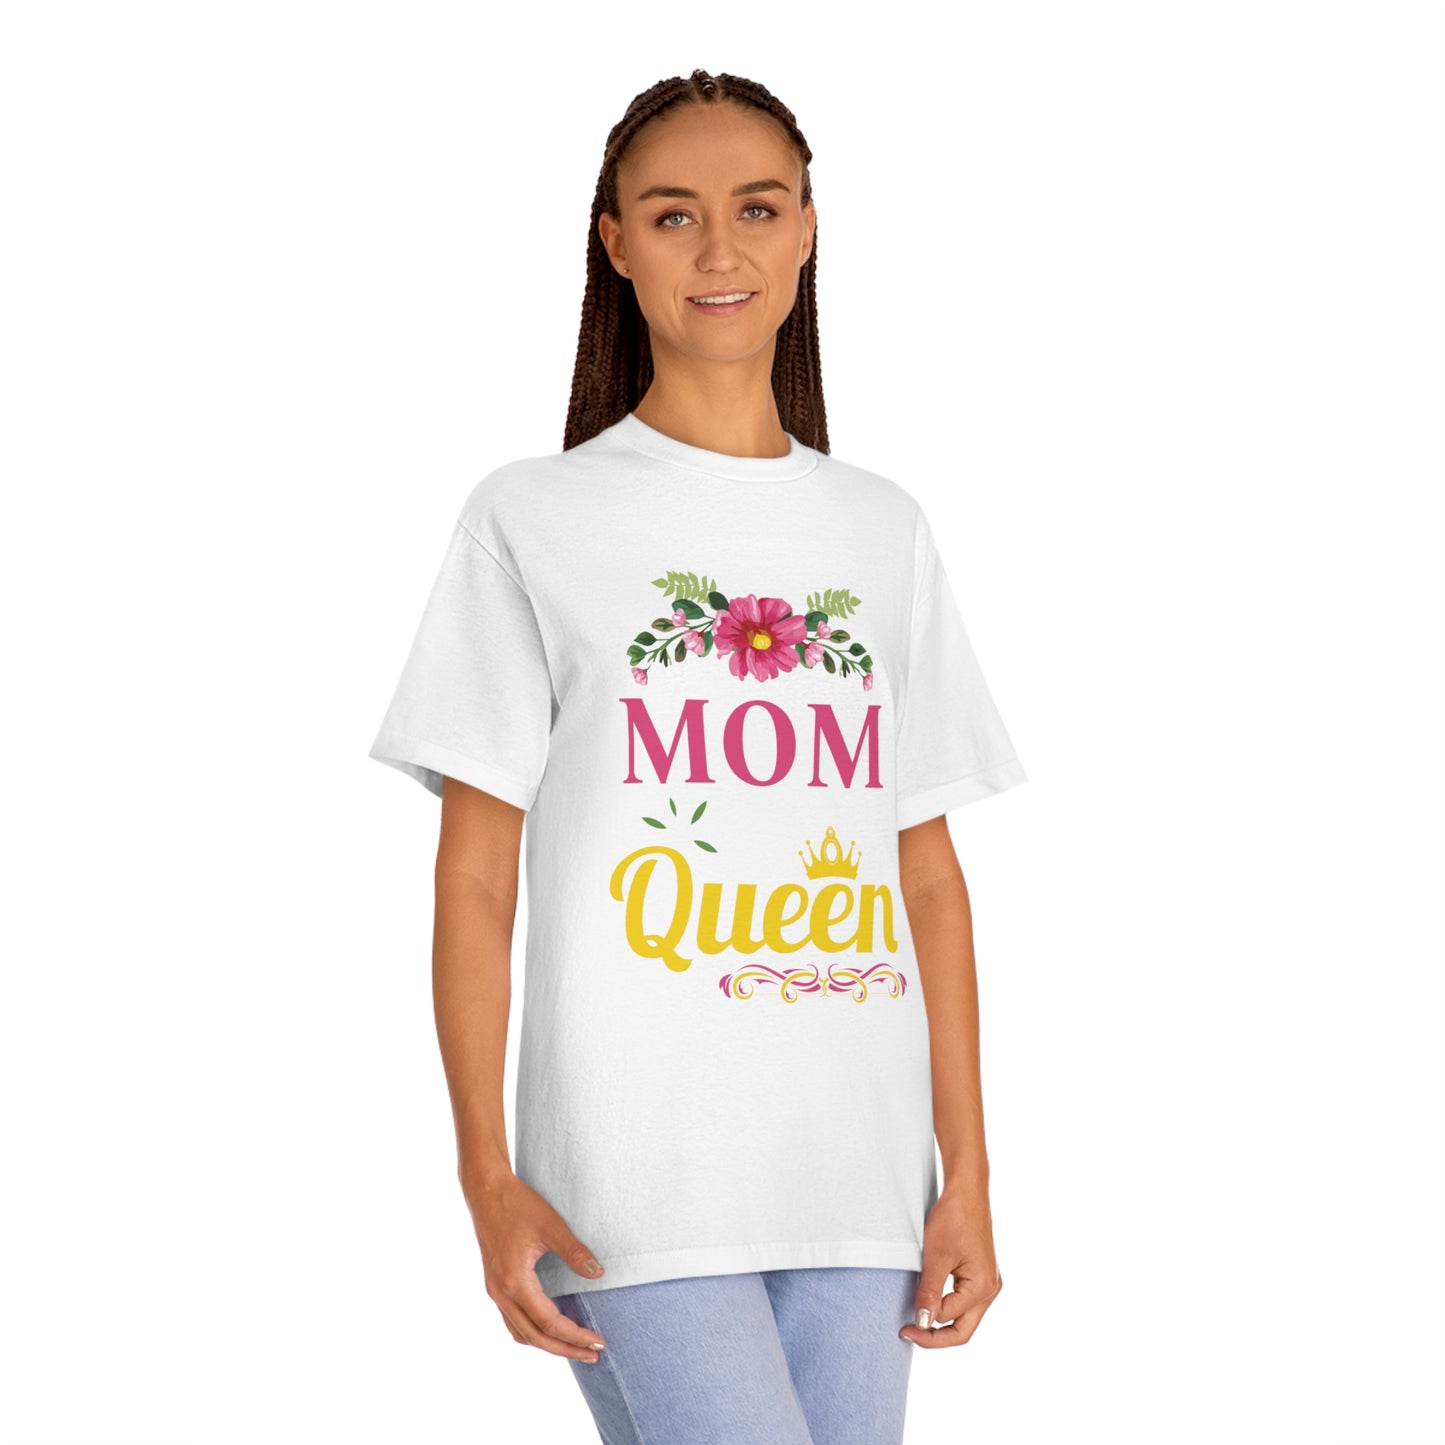 Mom you are the queen Unisex Classic Tee